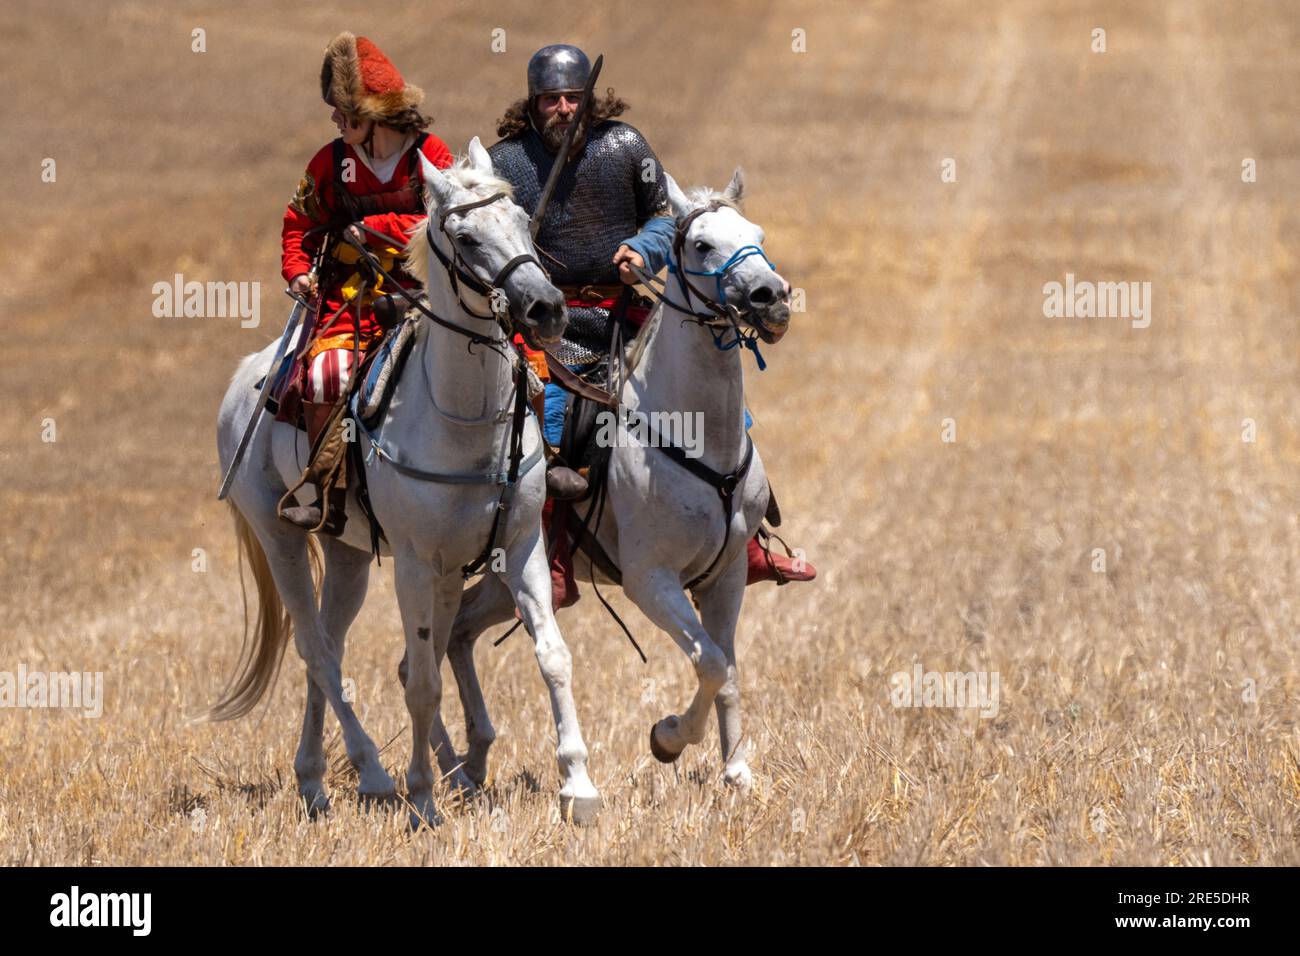 Reenactment of the Battle of Horns of Hattin.Clad in 12th century-style clothing, members of knights clubs reenacted the battle, also known as the Hor Stock Photo